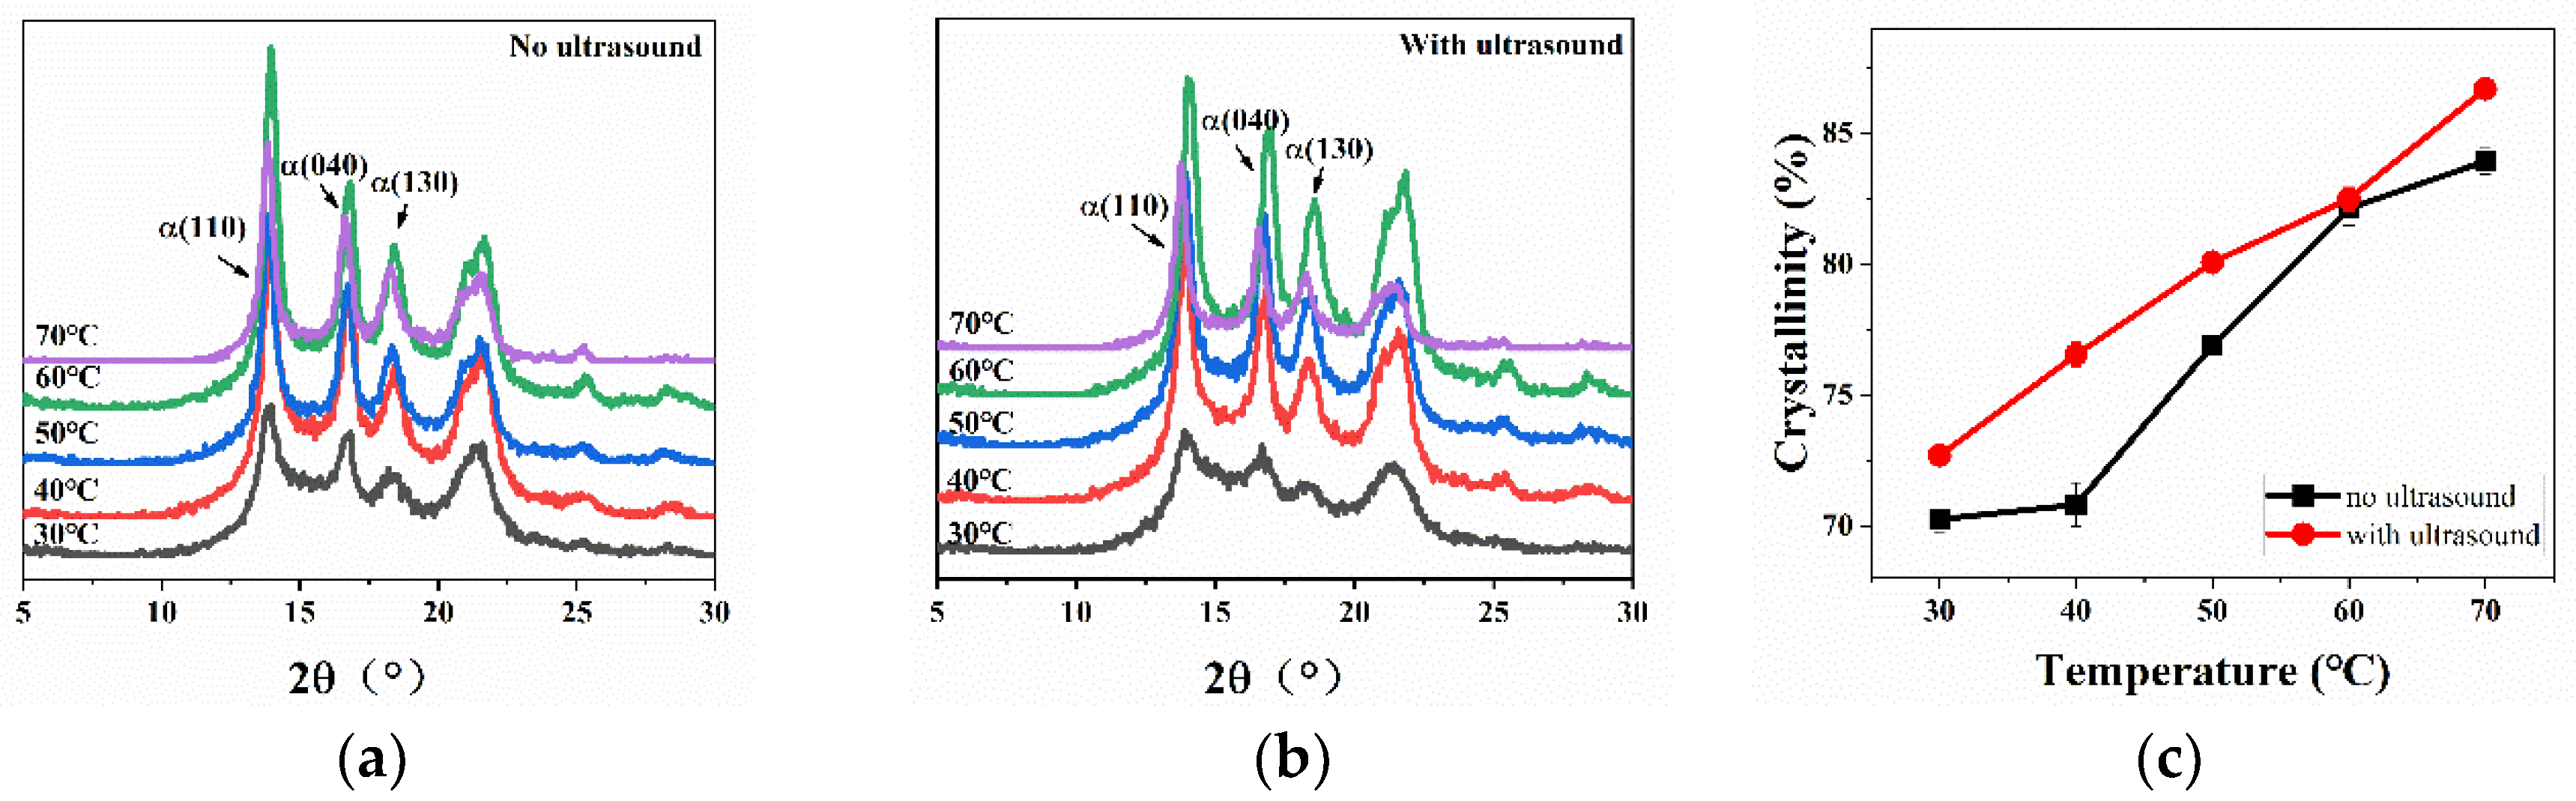 Polymers Free Full Text Crystalline Modification Of Isotactic Polypropylene With A Rare Earth Nucleating Agent Based On Ultrasonic Vibration Html